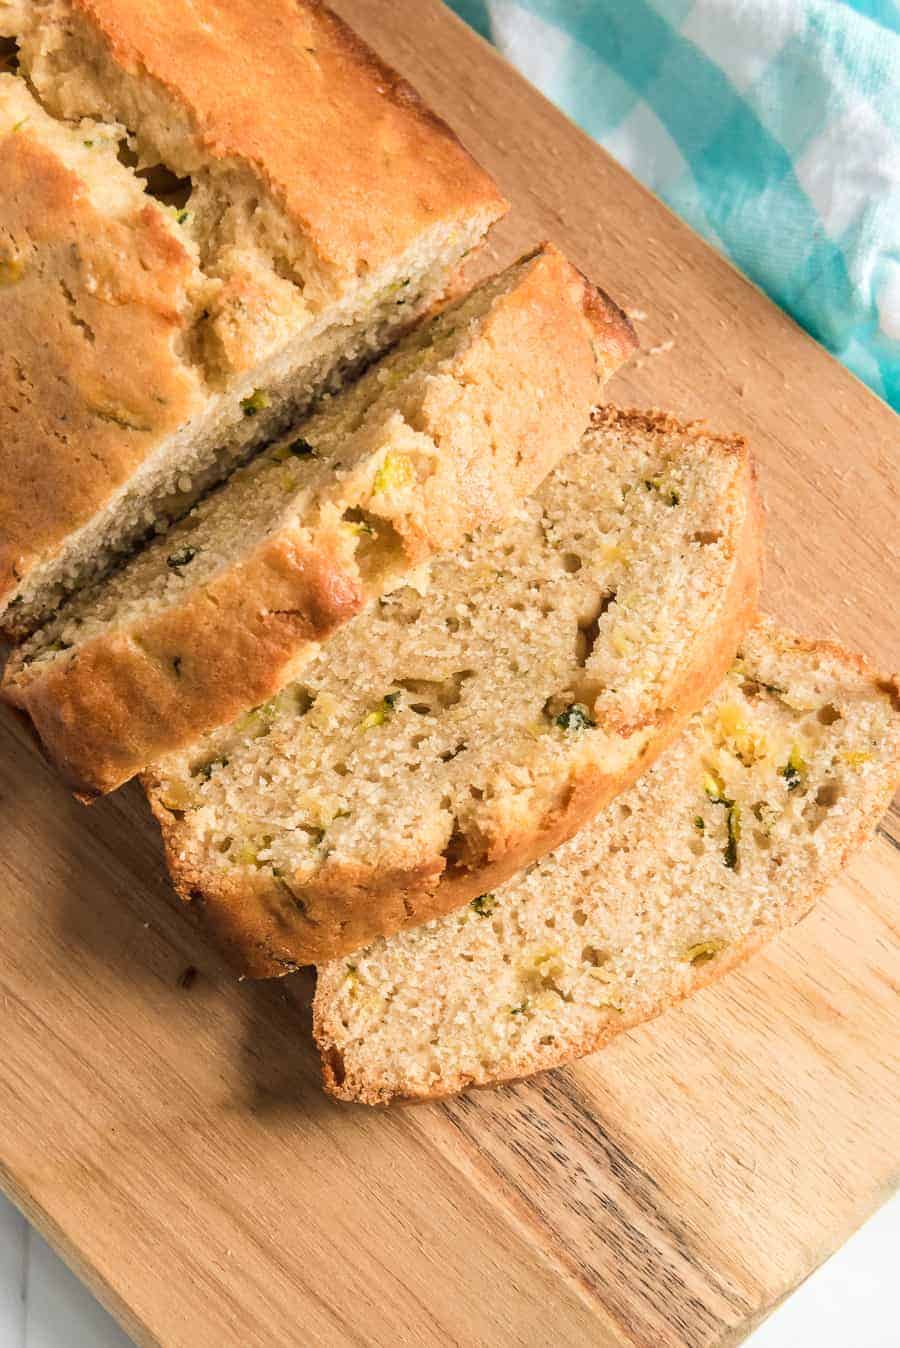 Moist and sweet, zucchini pineapple bread is a scrumptious and unexpectedly delicious treat that you need to try today!